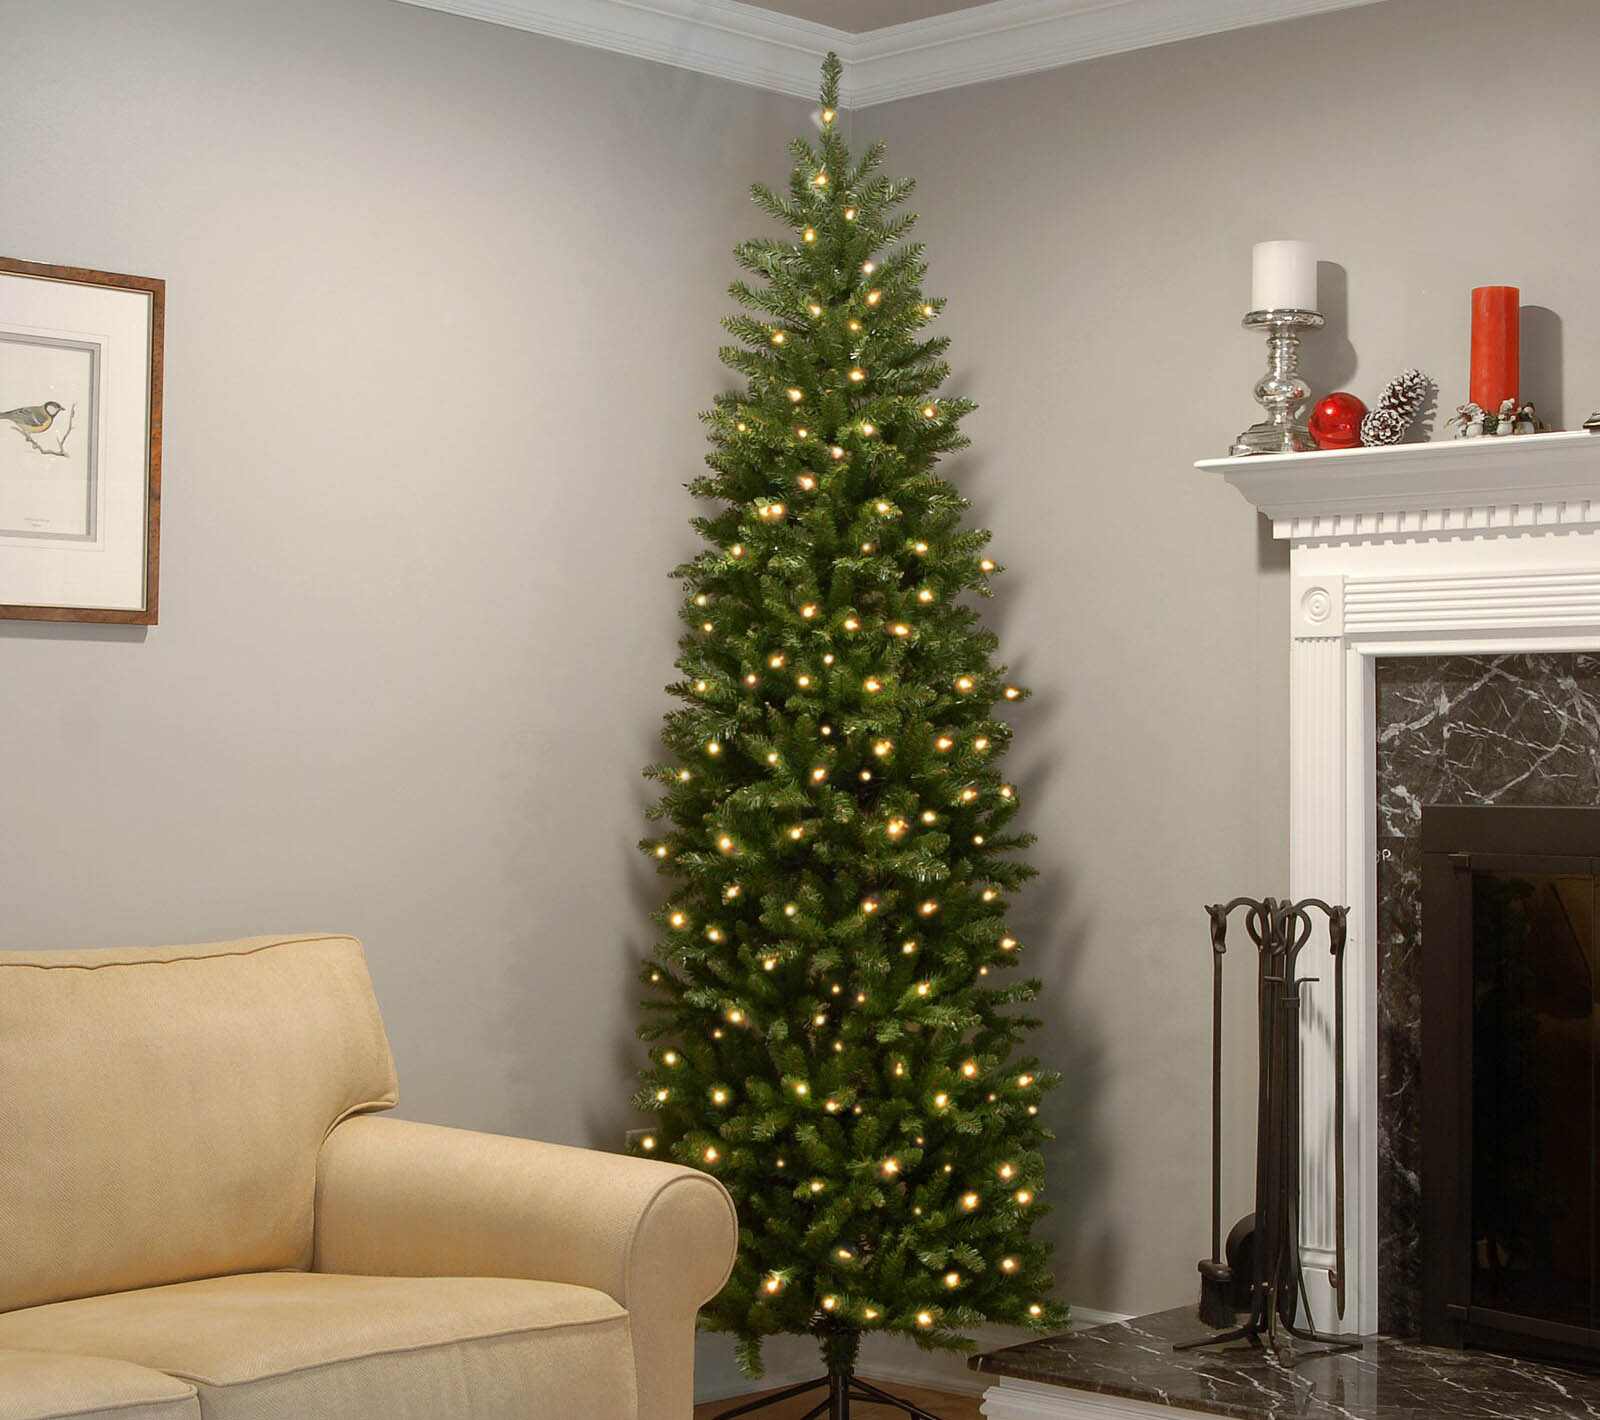 The Best Places to Buy Christmas Trees Option: Wayfair